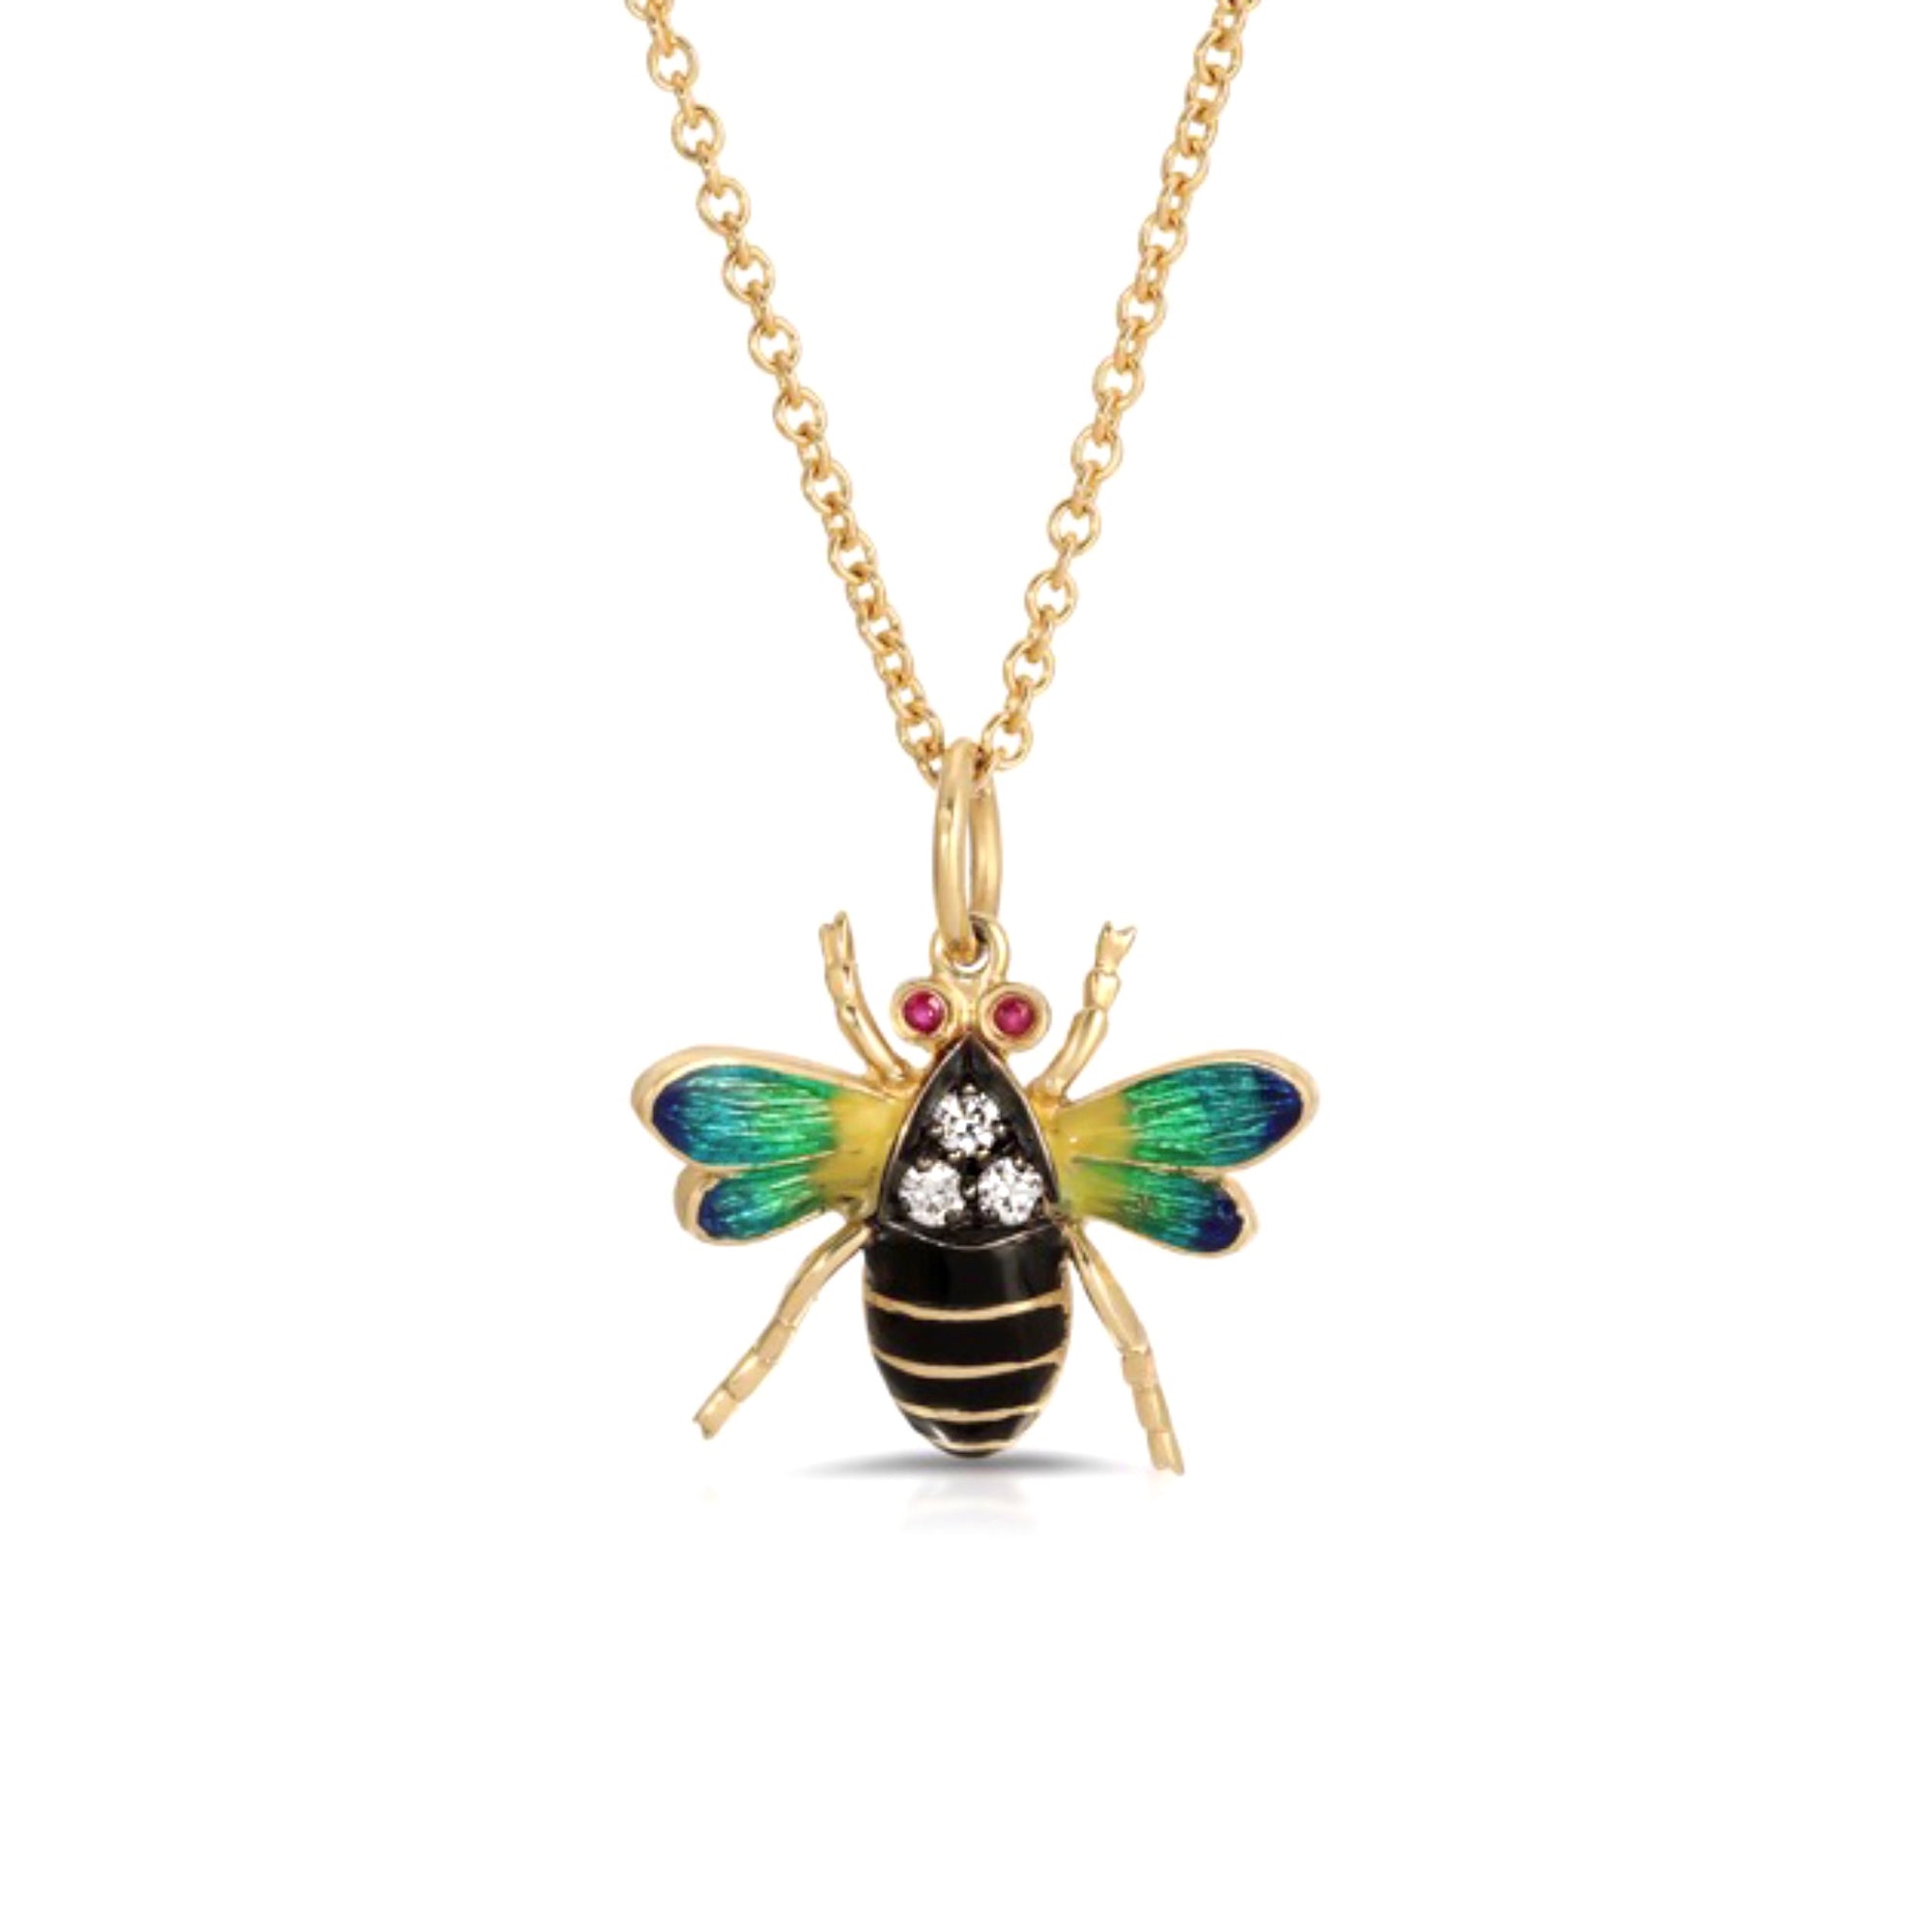 Enamel Bumble Bee Pendant Necklace by Lord Jewelry available at Talisman Collection Fine Jewelers in El Dorado Hills, CA and online. A classic and often preppy motif, this delightful 18k enamel bumble bee necklace features ombre blue-green enamel wings and is accented with 0.15 carats of diamonds and 0.05 carats of rubies for a touch of sparkle. Worn alone or layered, this sweet necklace will add a playful pop of color to your look.